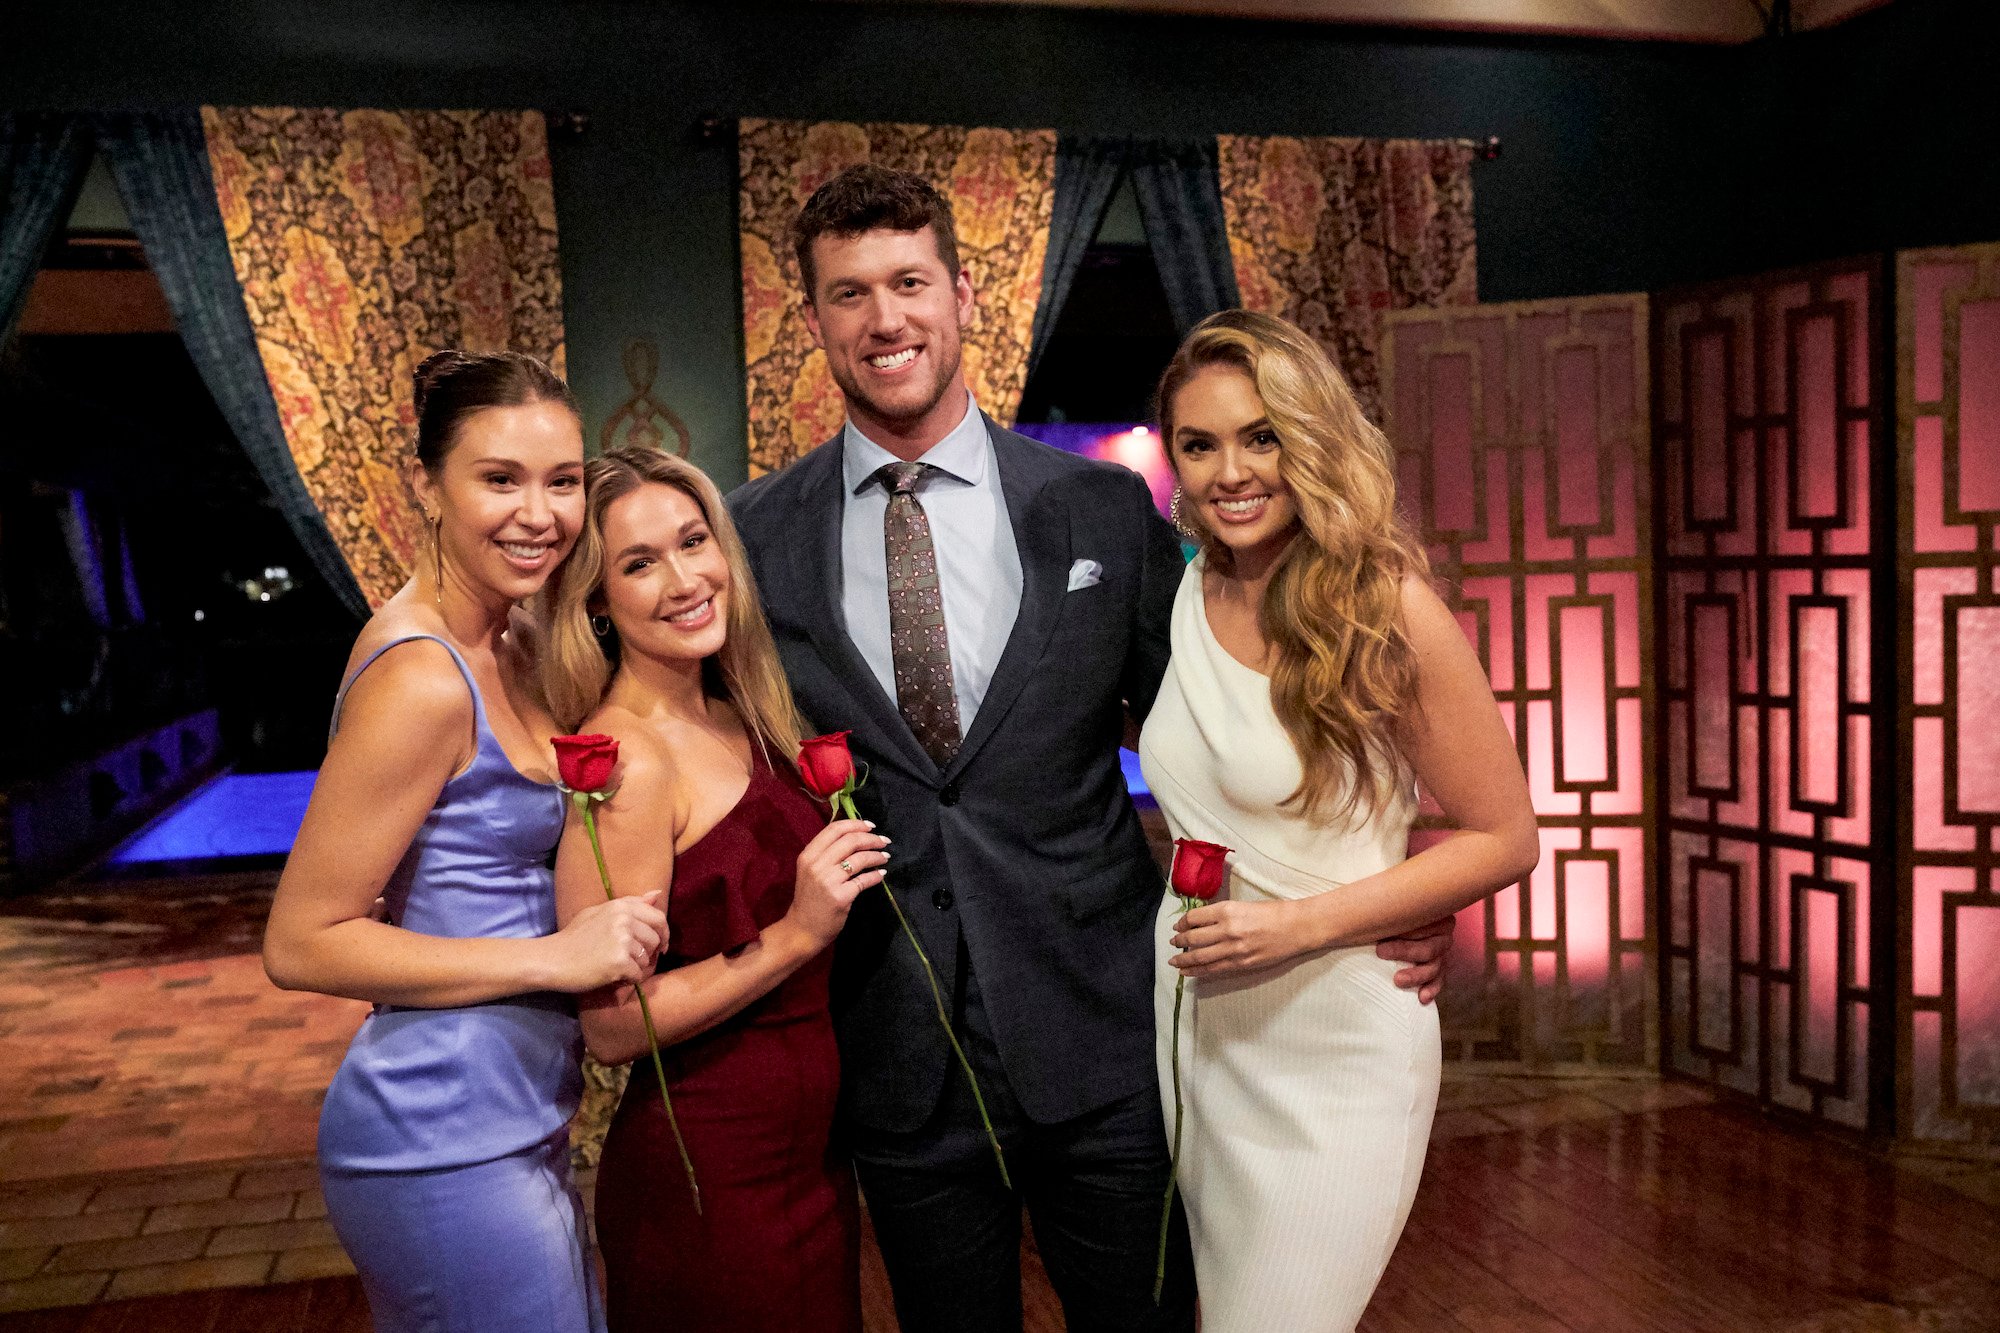 'The Bachelor' Clayton Echard Breaks Down What He Learned From His Time